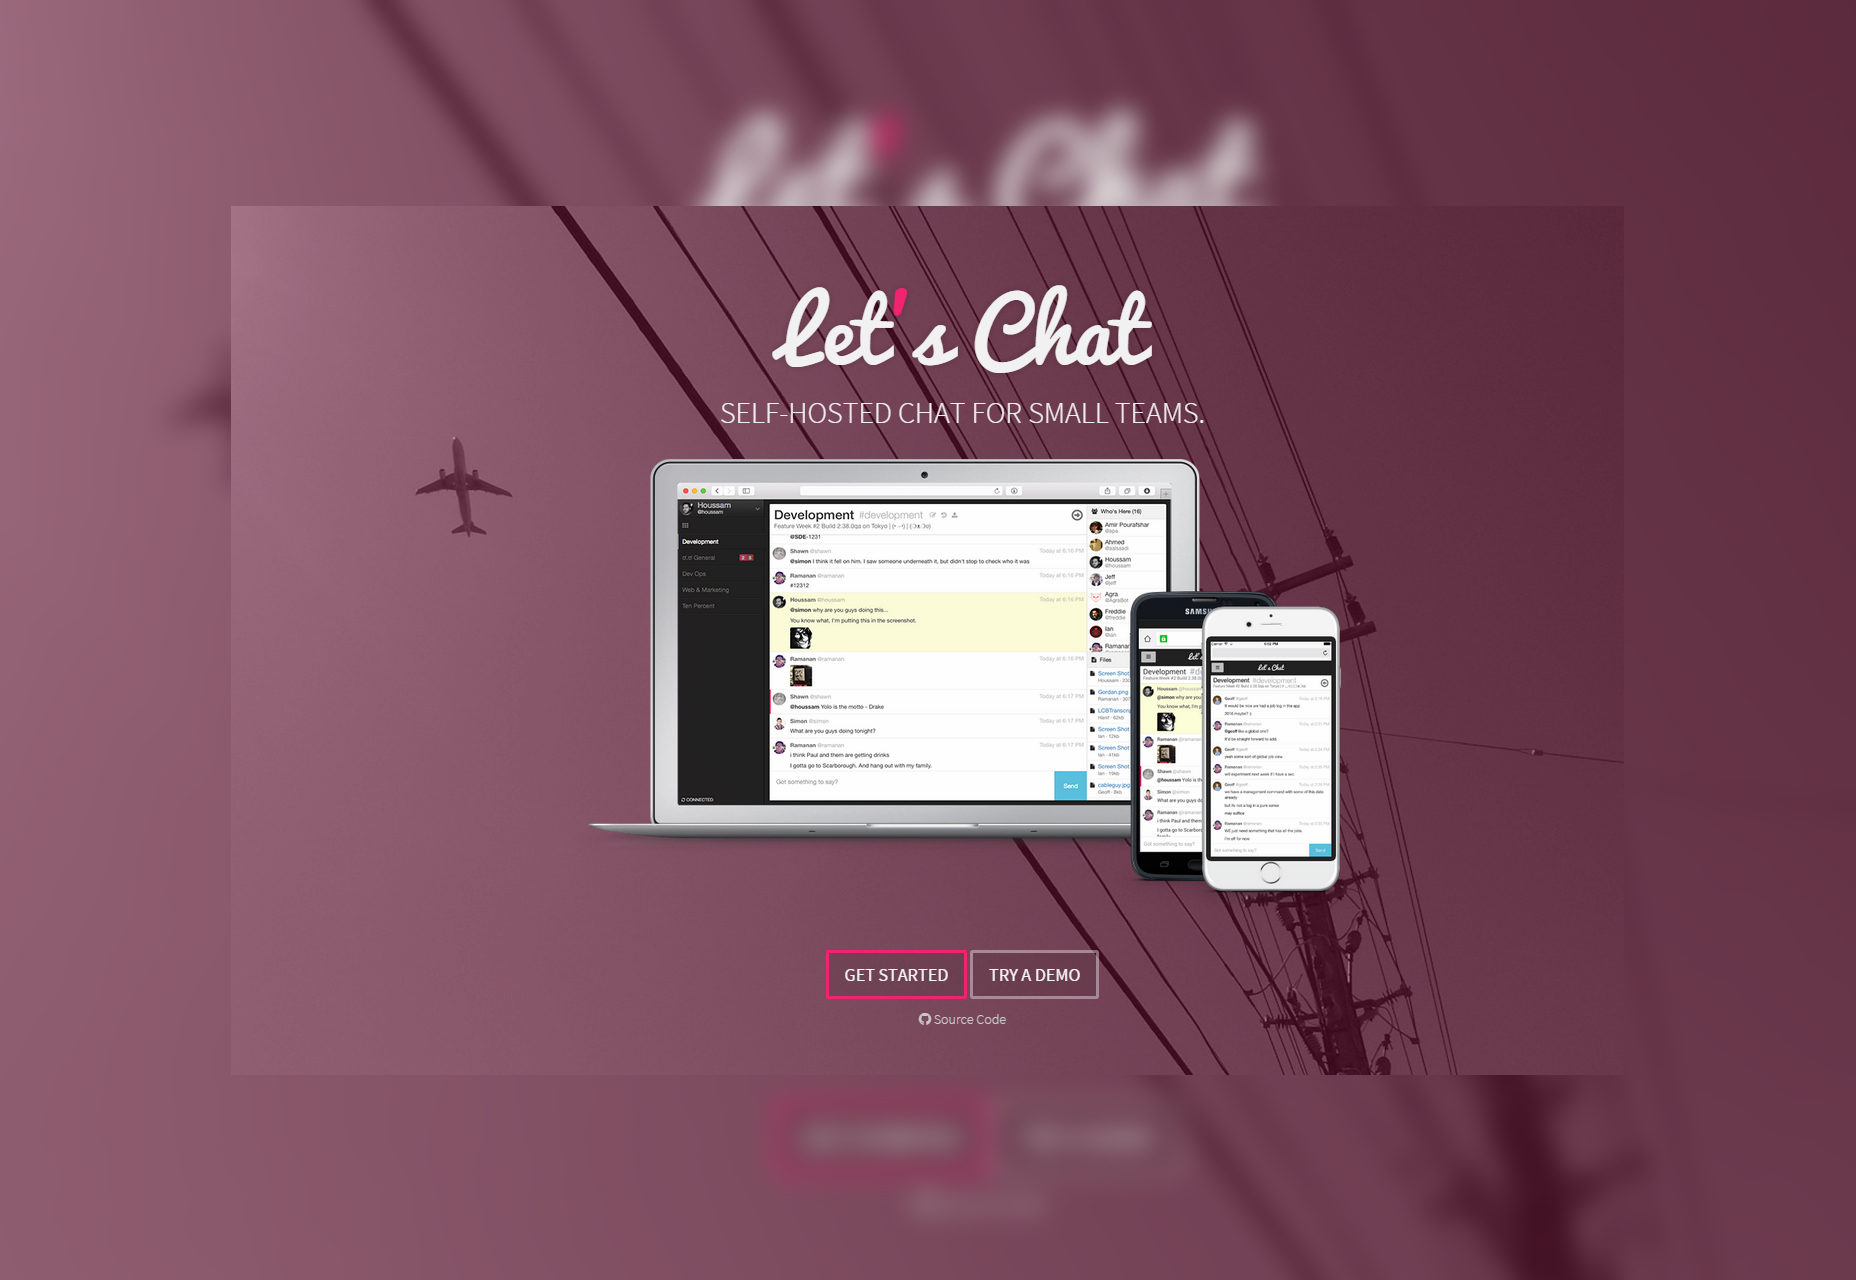 Let's Chat: Kleines selbst gehostetes Chat-Tool